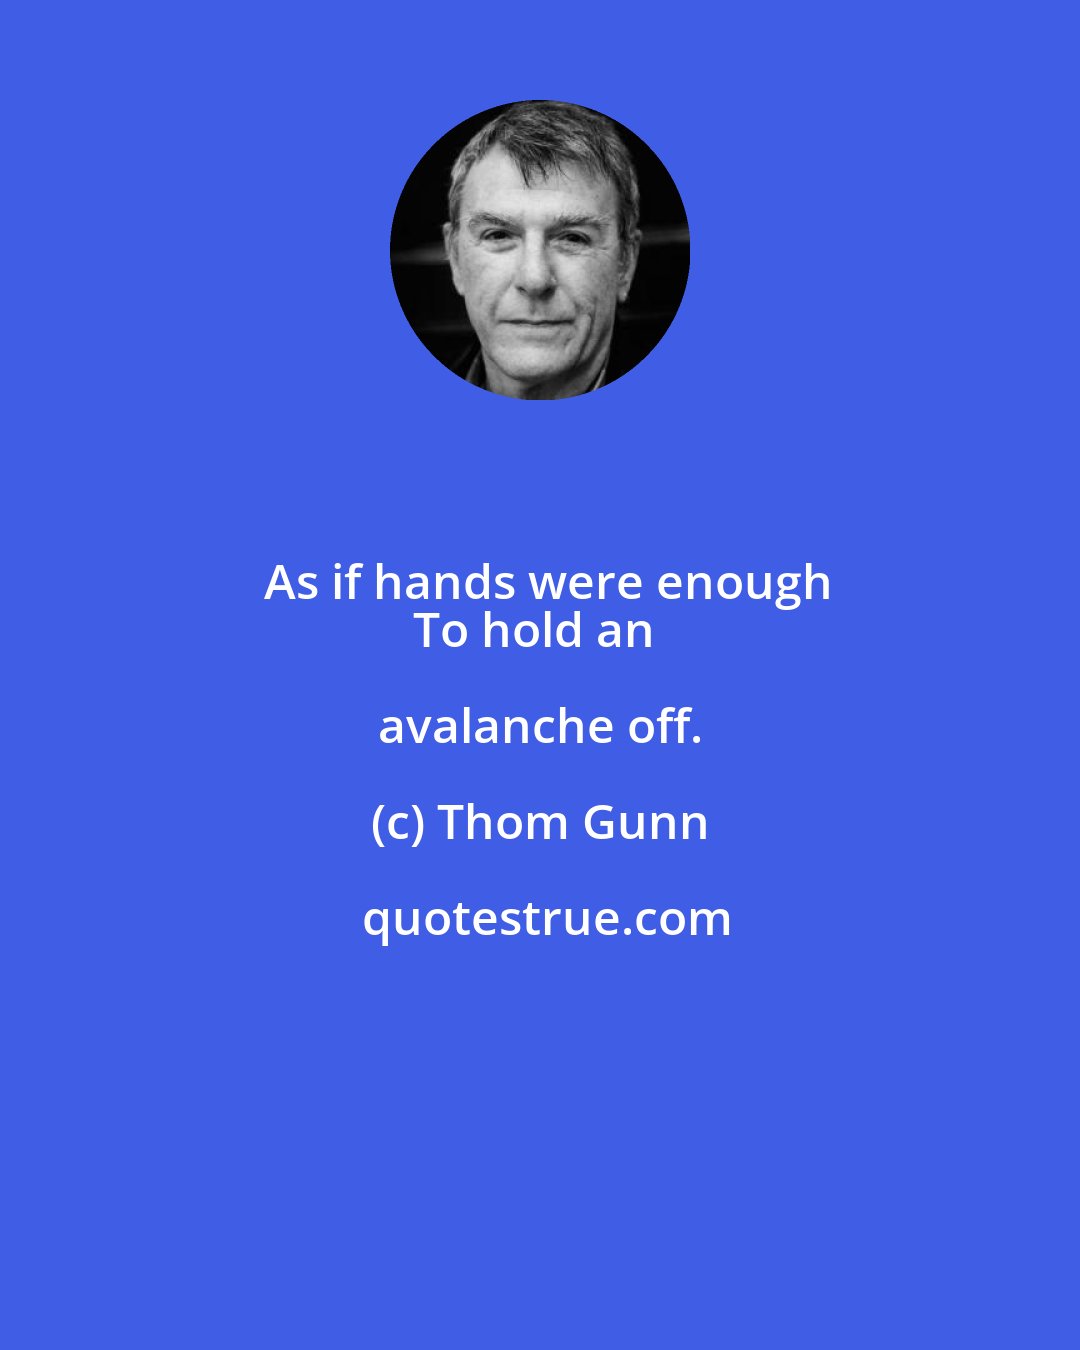 Thom Gunn: As if hands were enough
To hold an avalanche off.